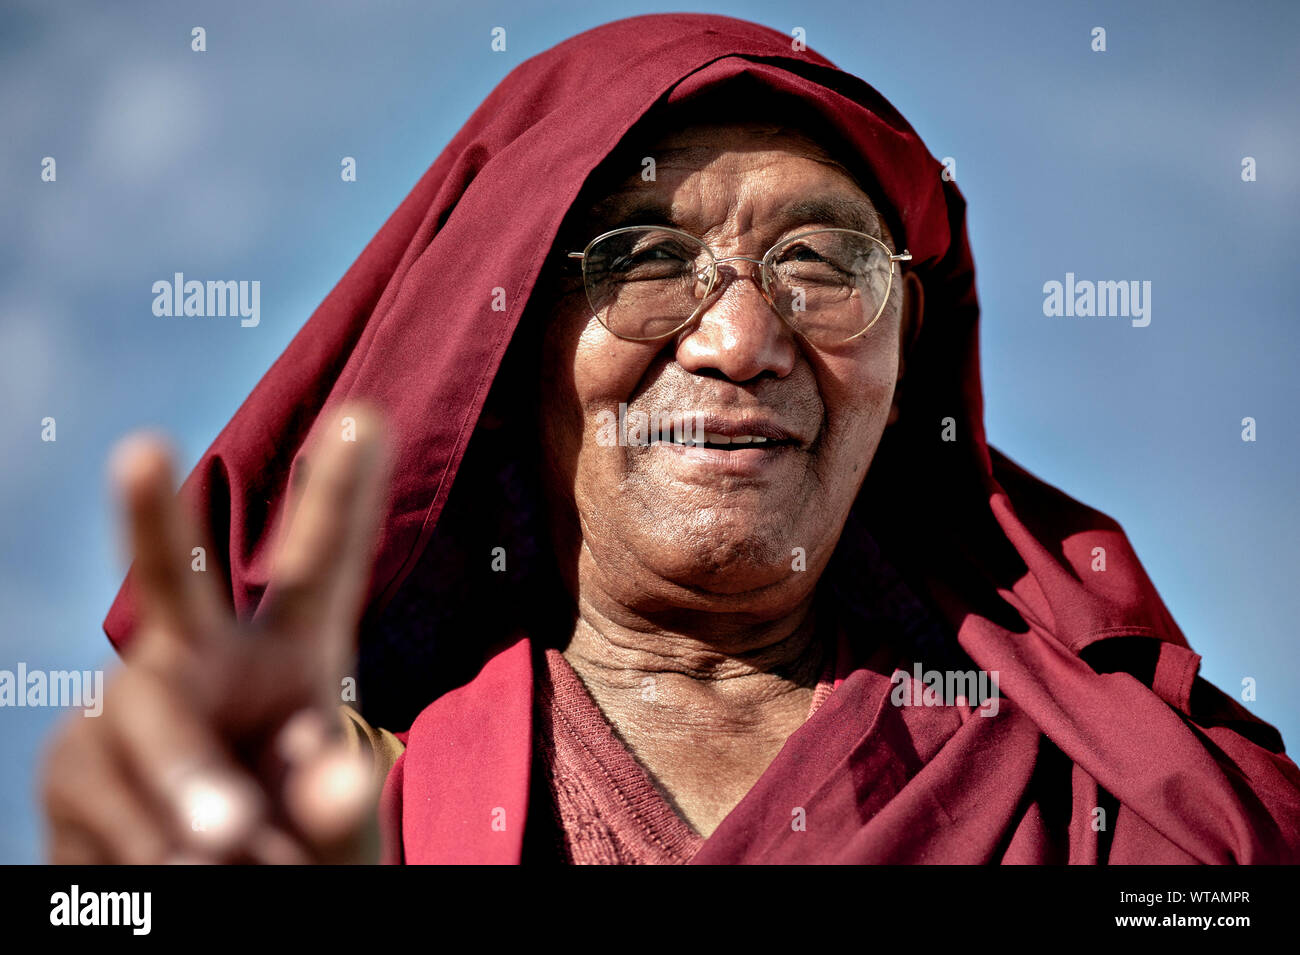 Monk making peace sign and smiling Stock Photo